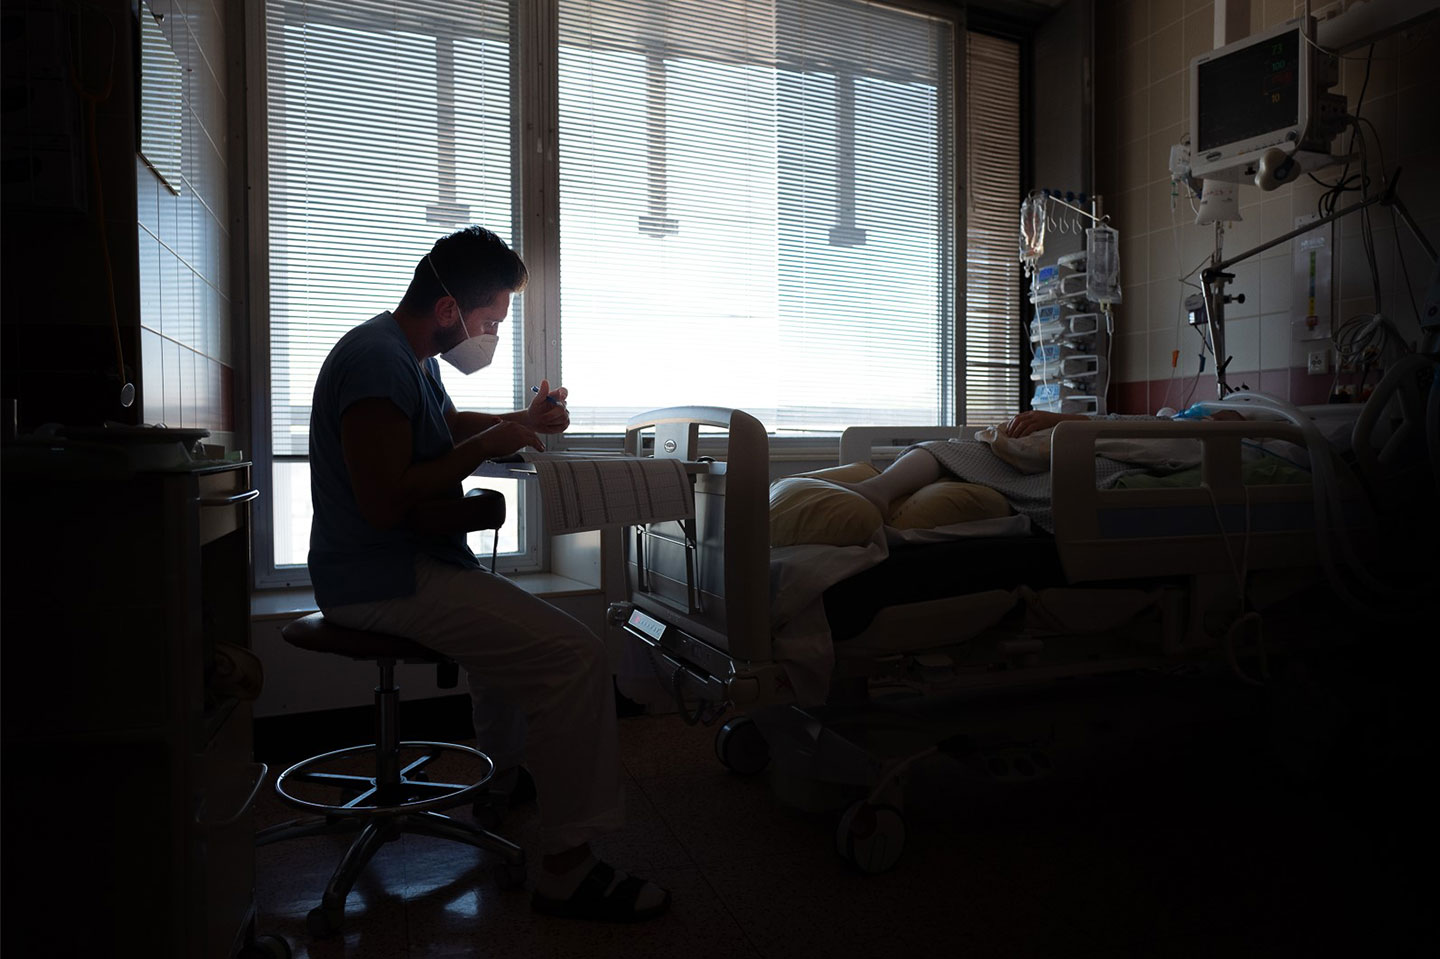 Nurse in dark hospital room filling out files next to patient’s bed